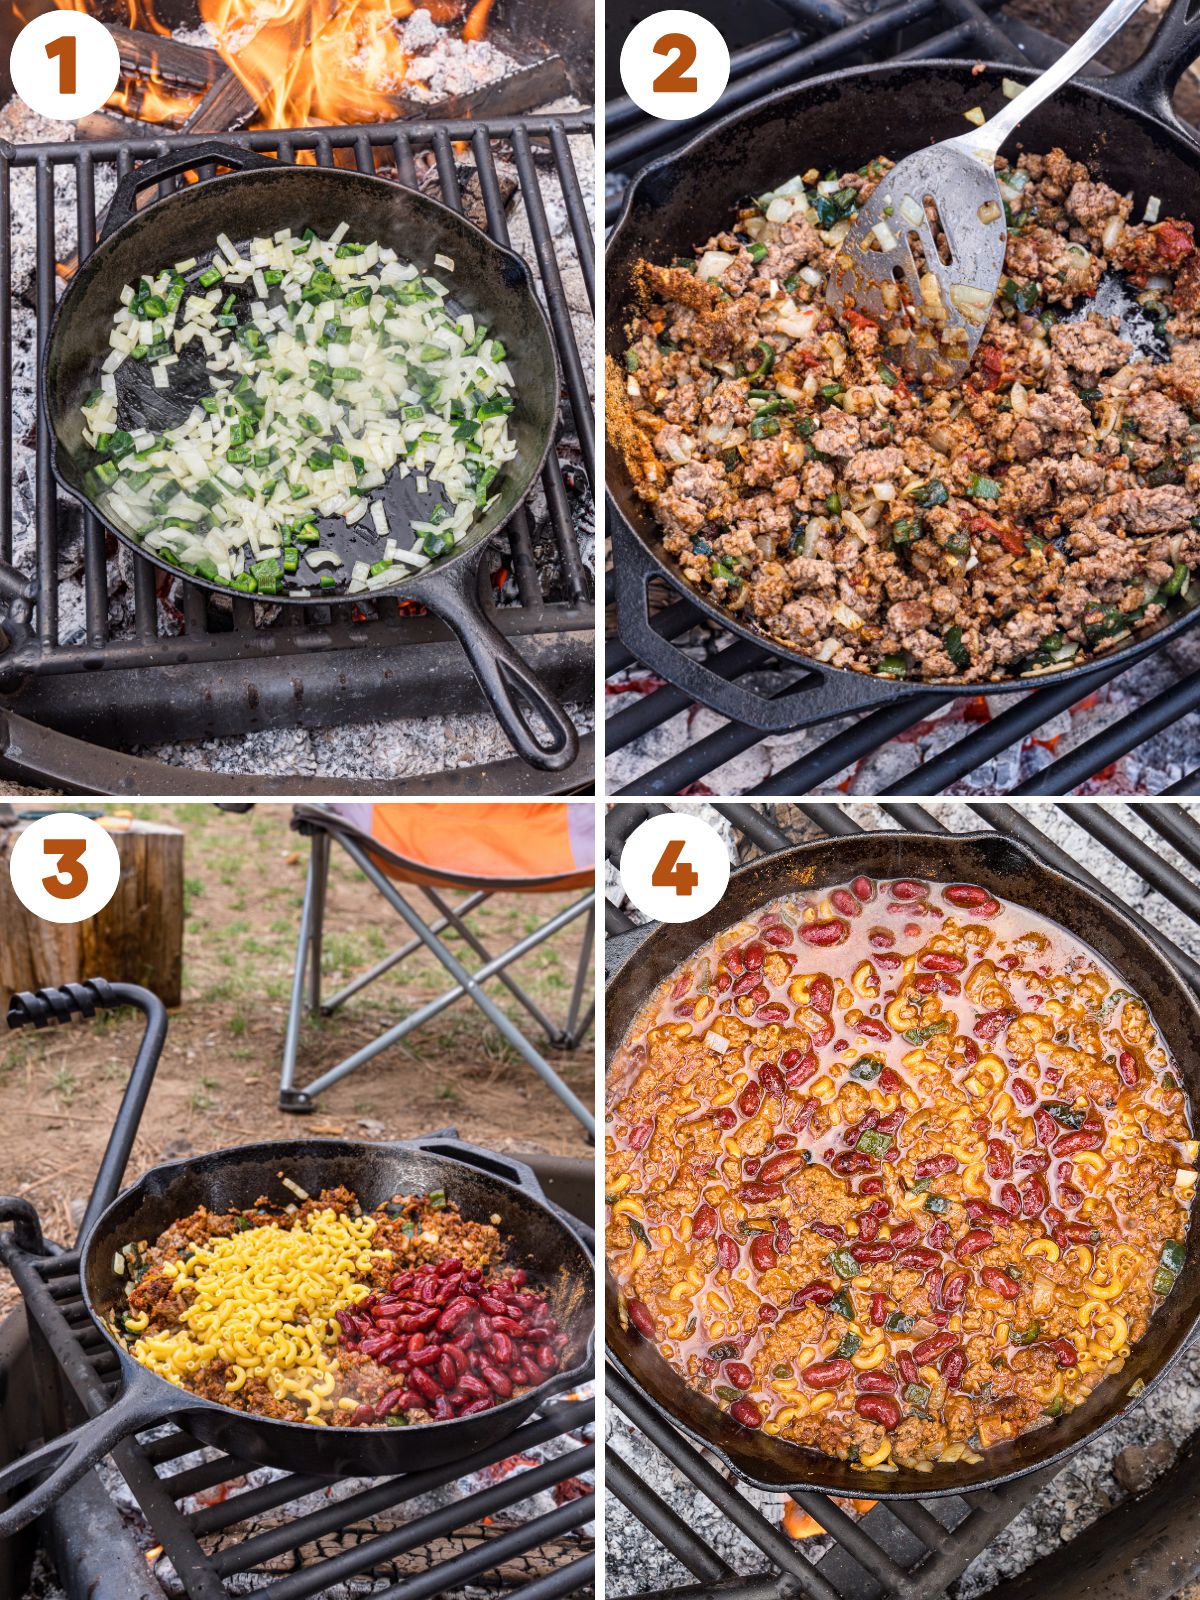 Step by step depictions of cooking chili mac